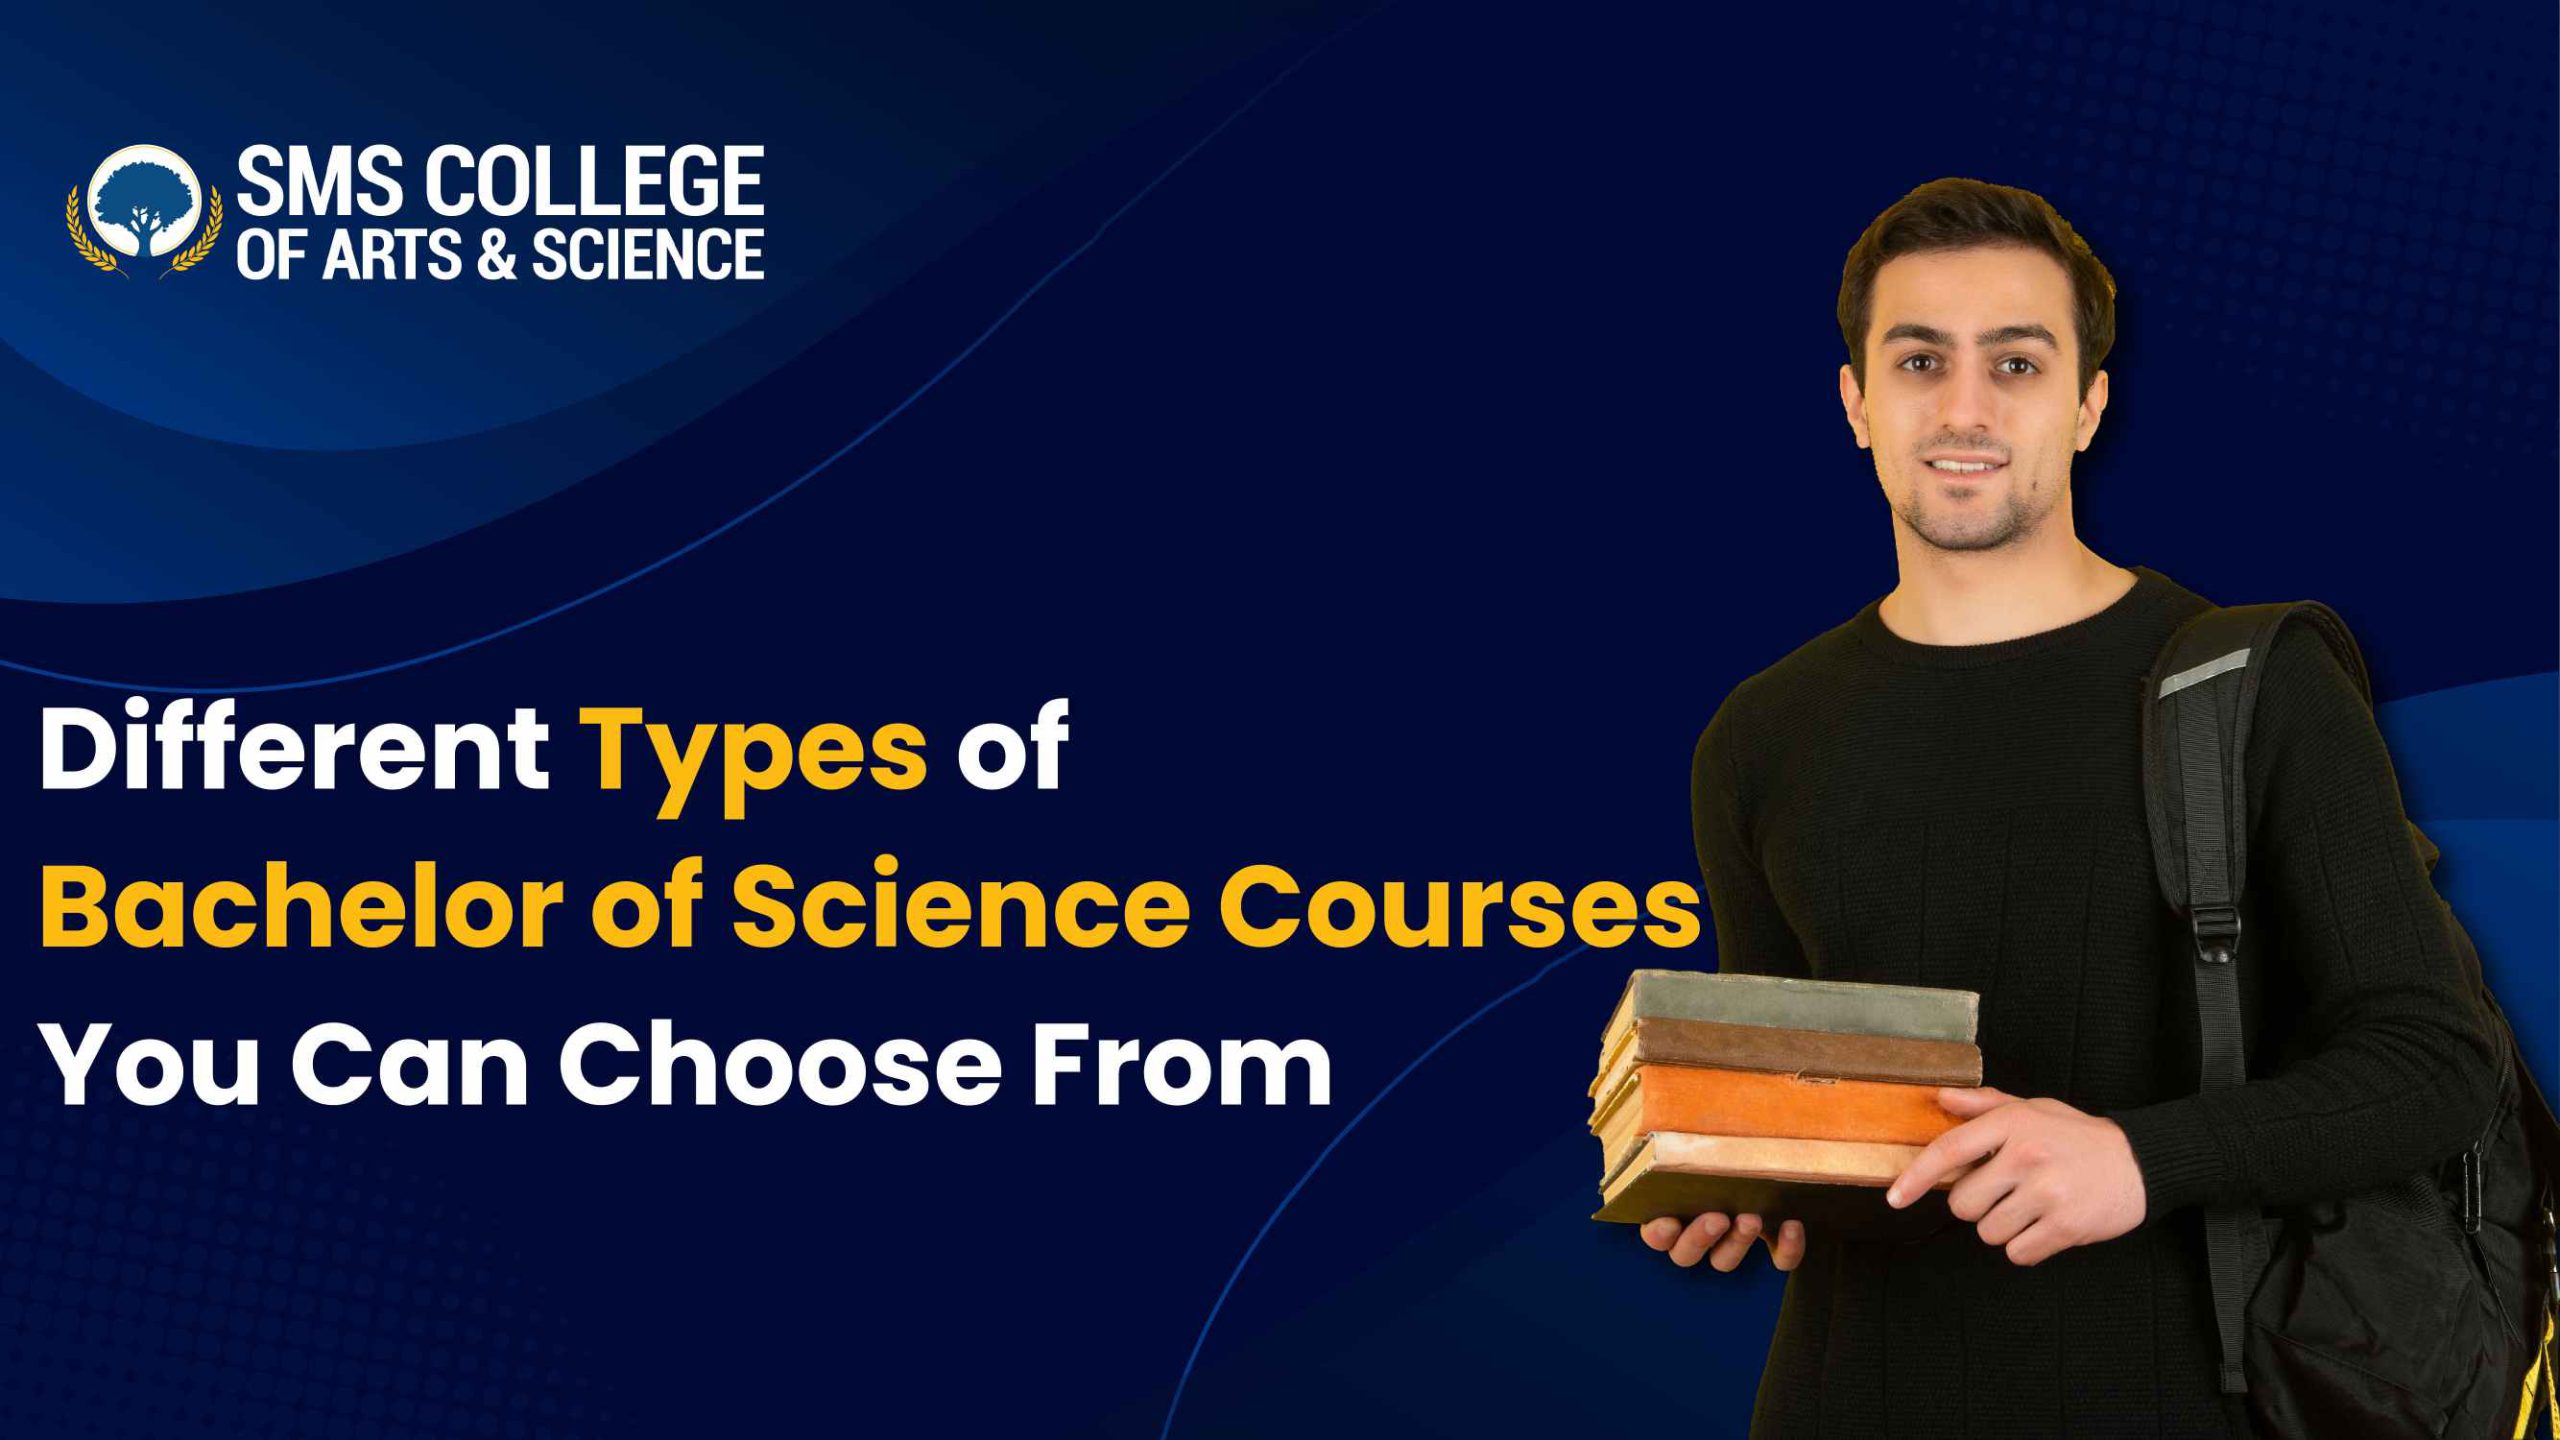 Bachelor of Science Courses